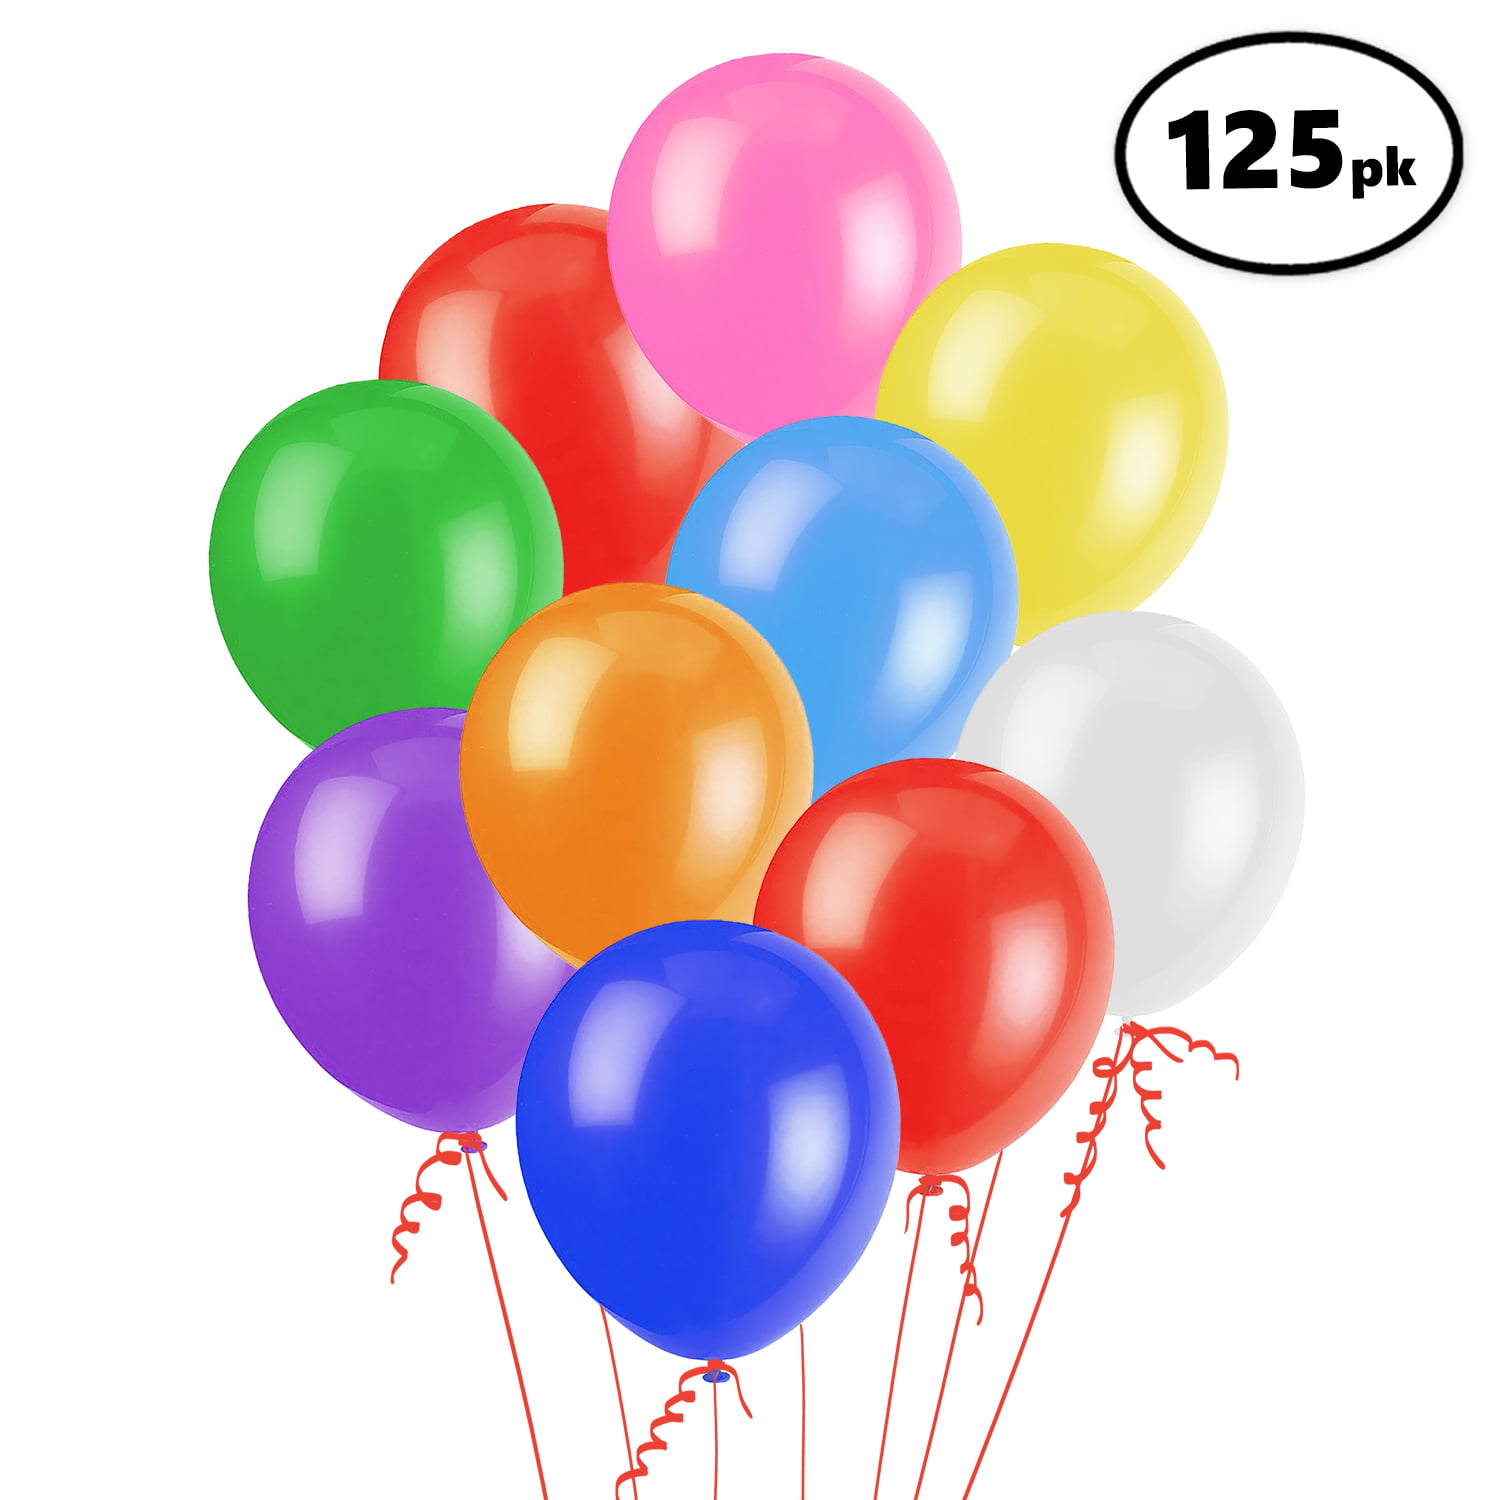 Are All Balloons Made Out of Latex? - Answereco